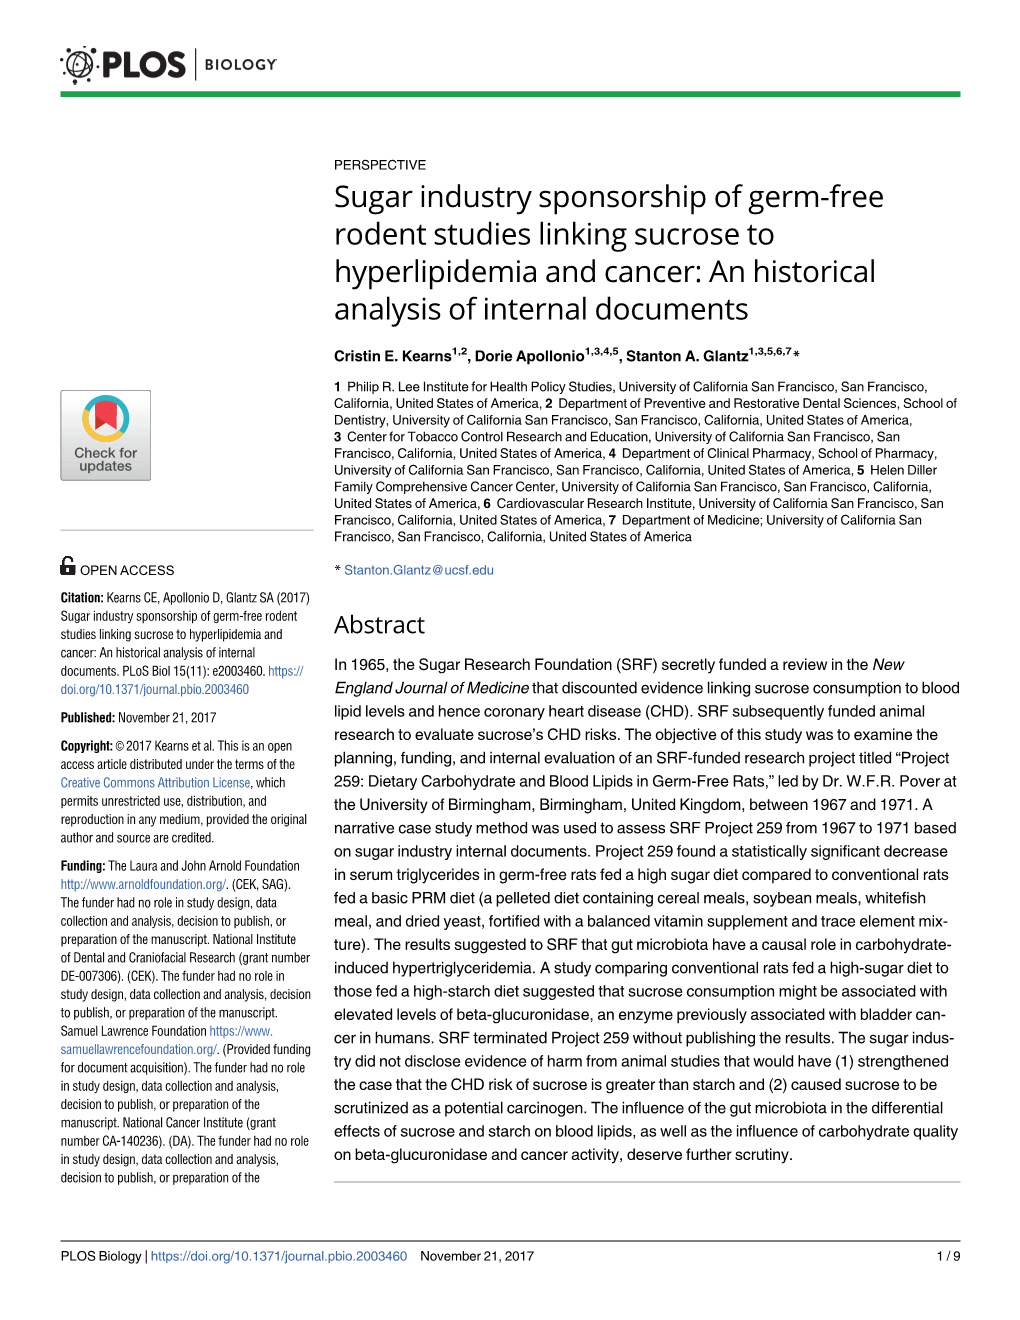 Sugar Industry Sponsorship of Germ-Free Rodent Studies Linking Sucrose to Hyperlipidemia and Cancer: an Historical Analysis of Internal Documents